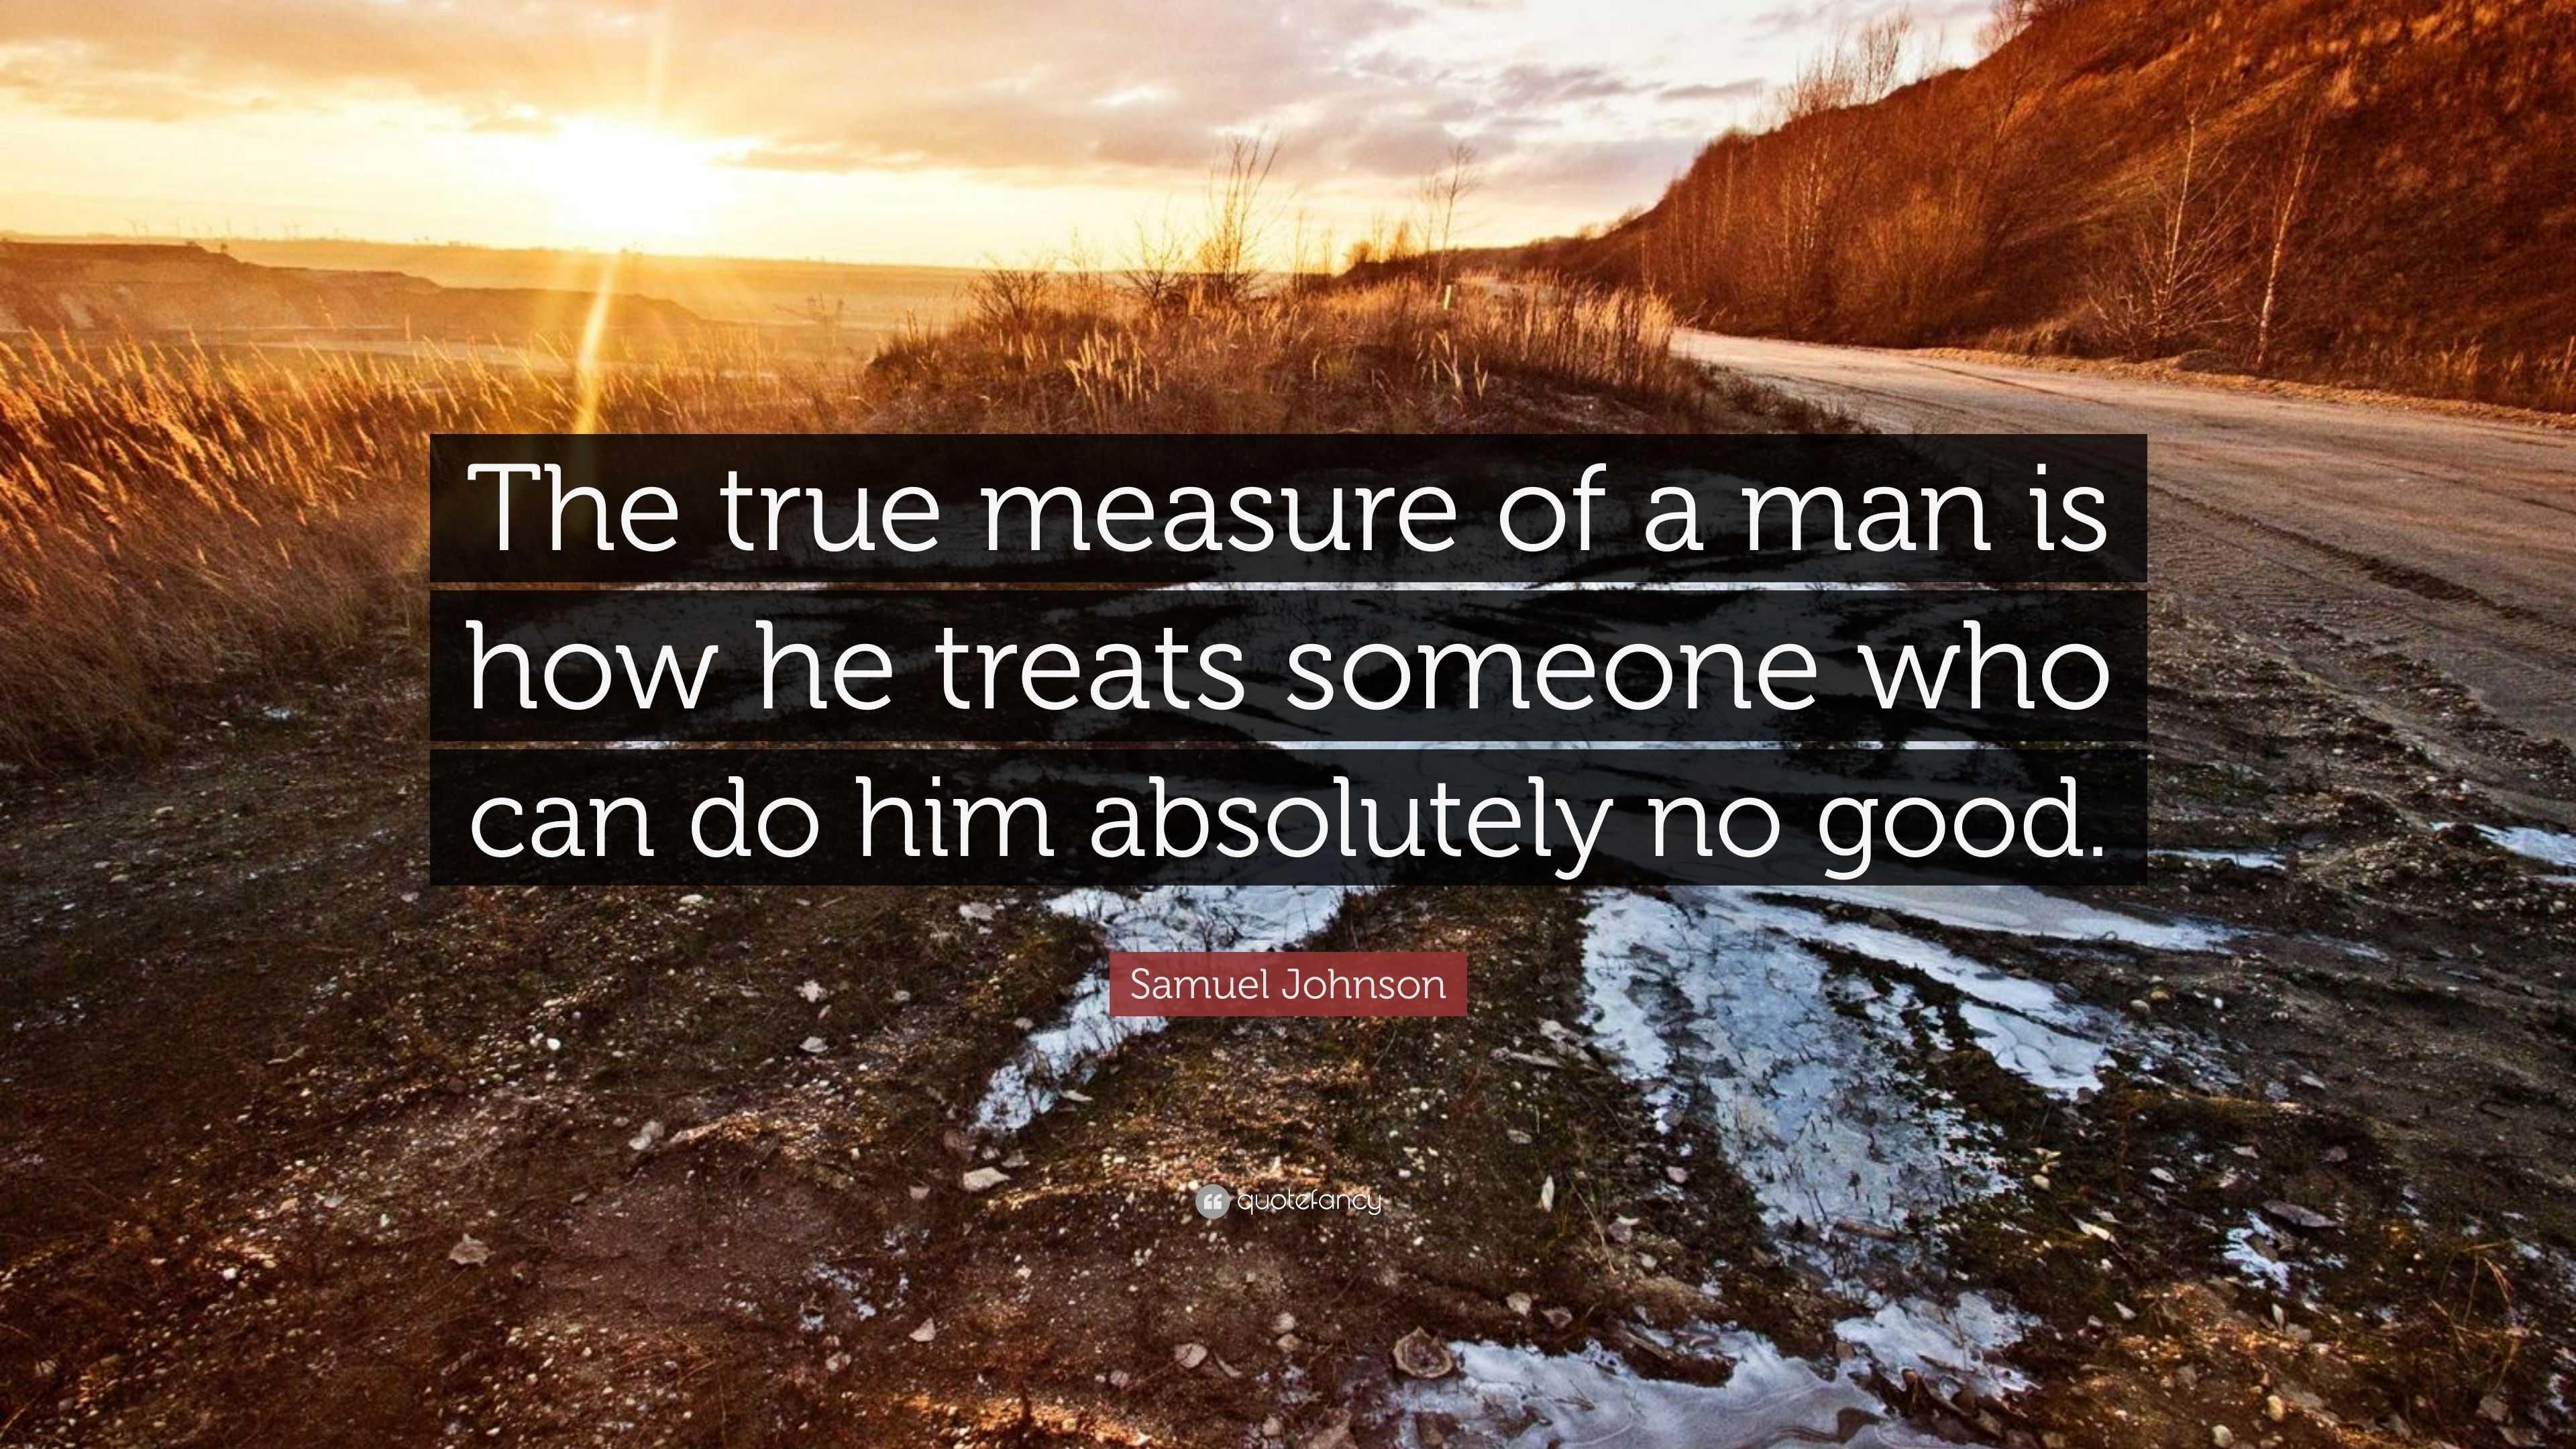 Samuel Johnson Quote: “The true measure of a man is how he treats